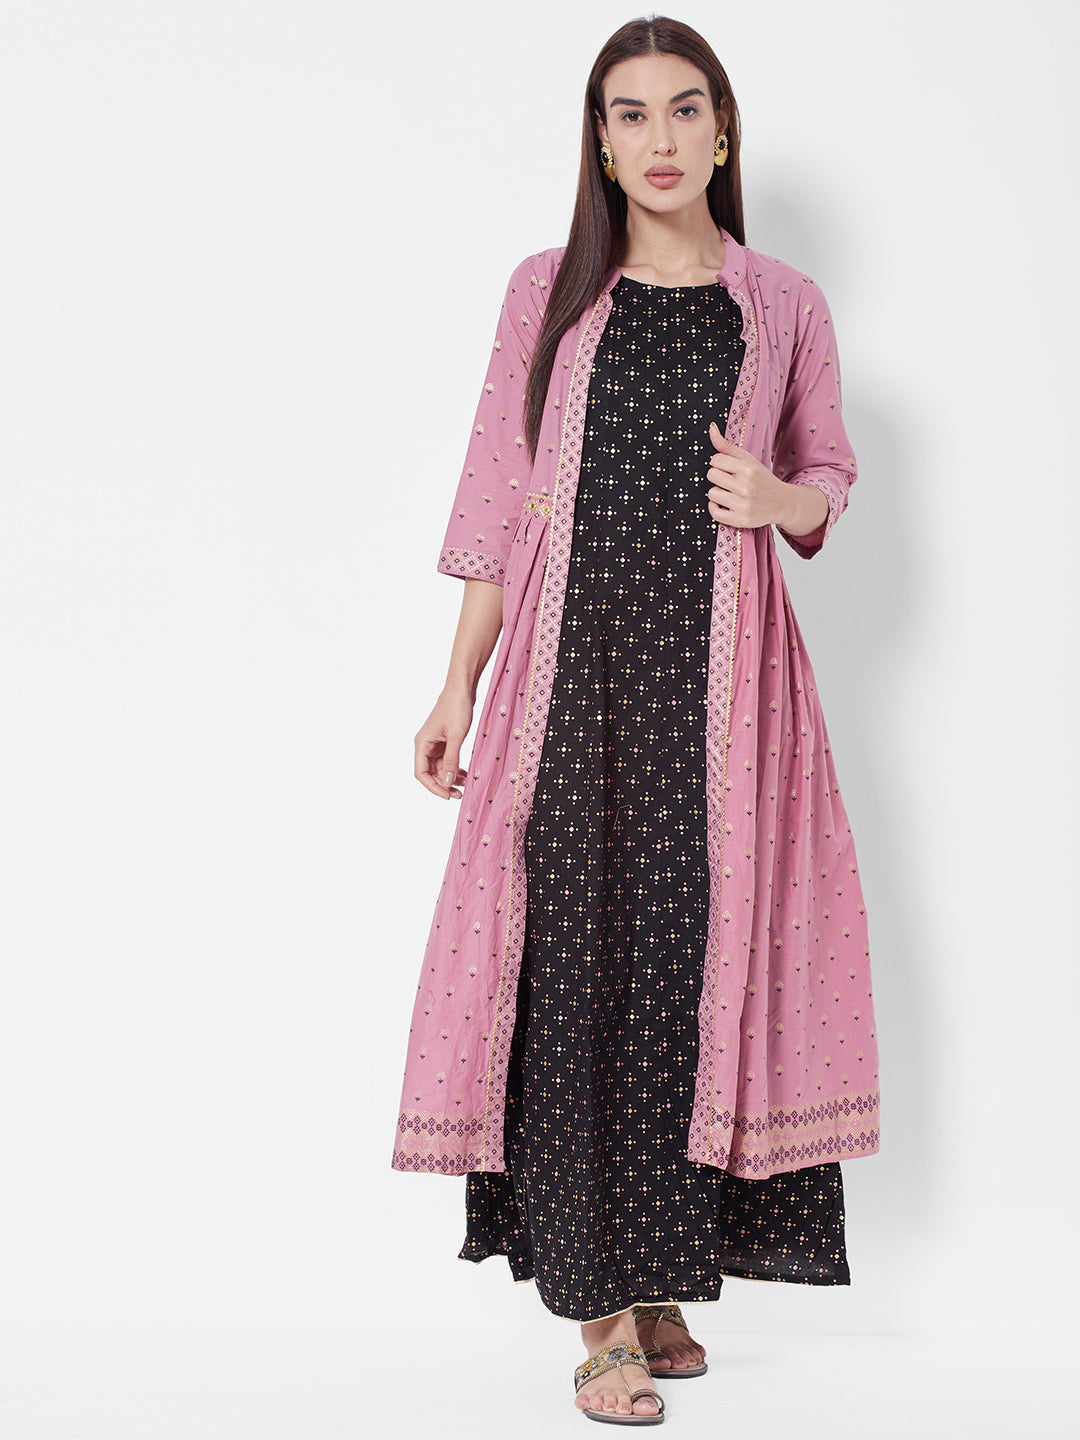 Ethnic Maxi Dresses - Shop from New Collection of Ethnic Maxi Dresses at  Mynytra